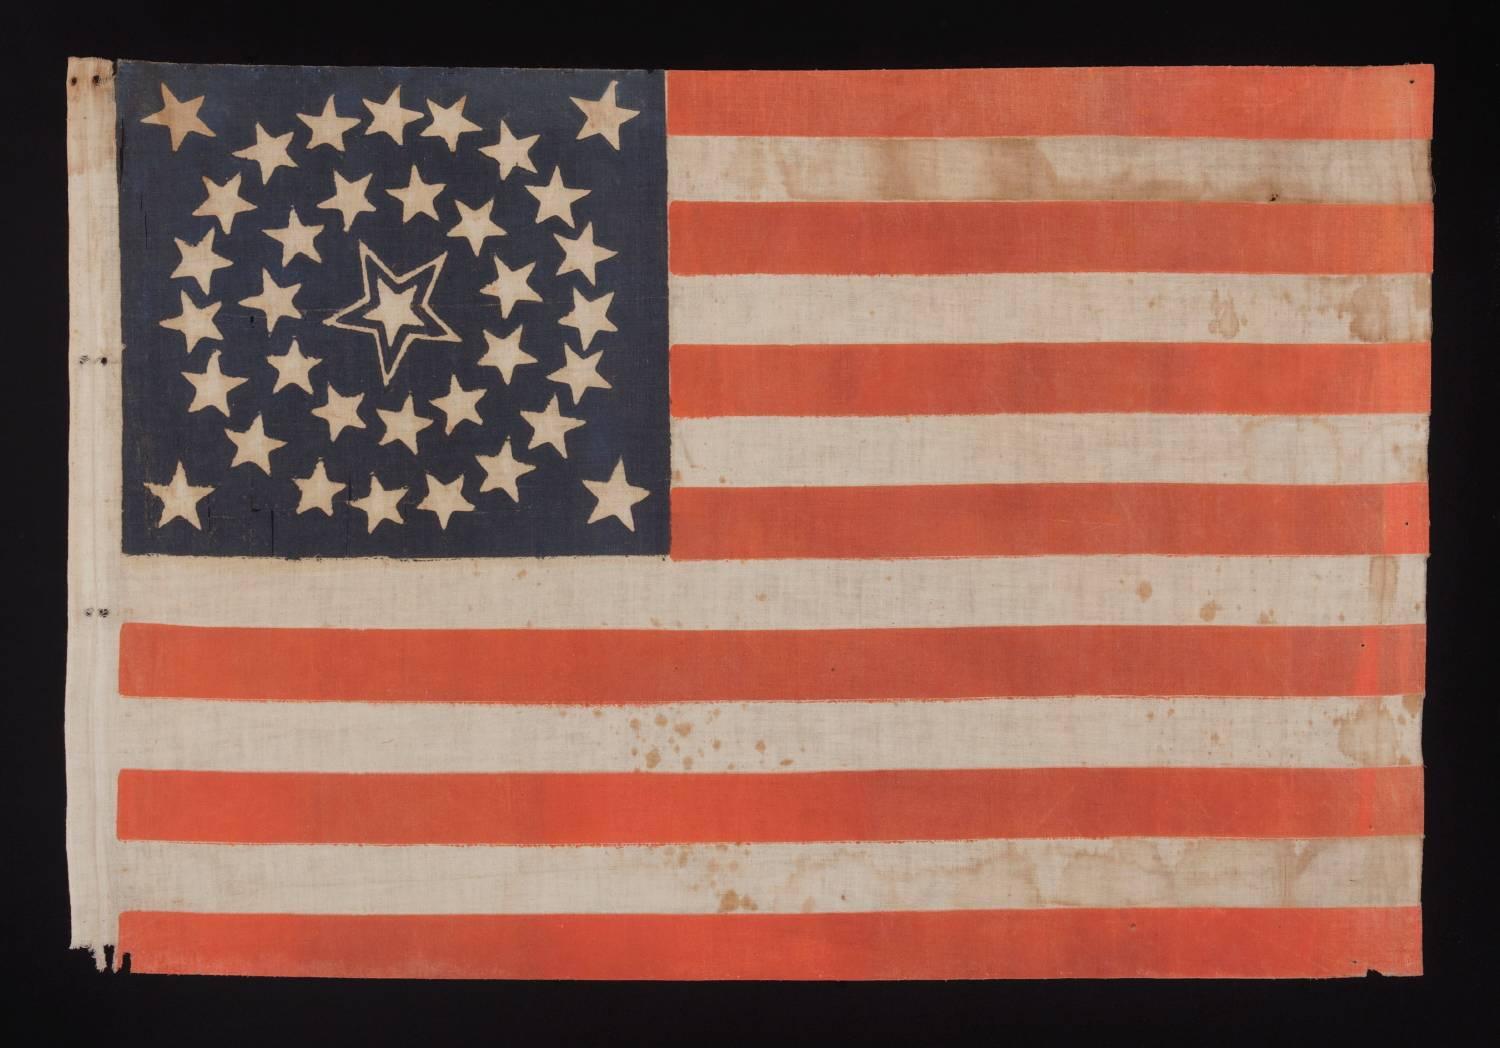 35 stars in a medallion configuration with a large, haloed center star, 1863-65, Civil War period, West Virginia statehood:

35 star American national parade flag, printed on cotton and bearing a beautiful medallion configuration that has a huge,